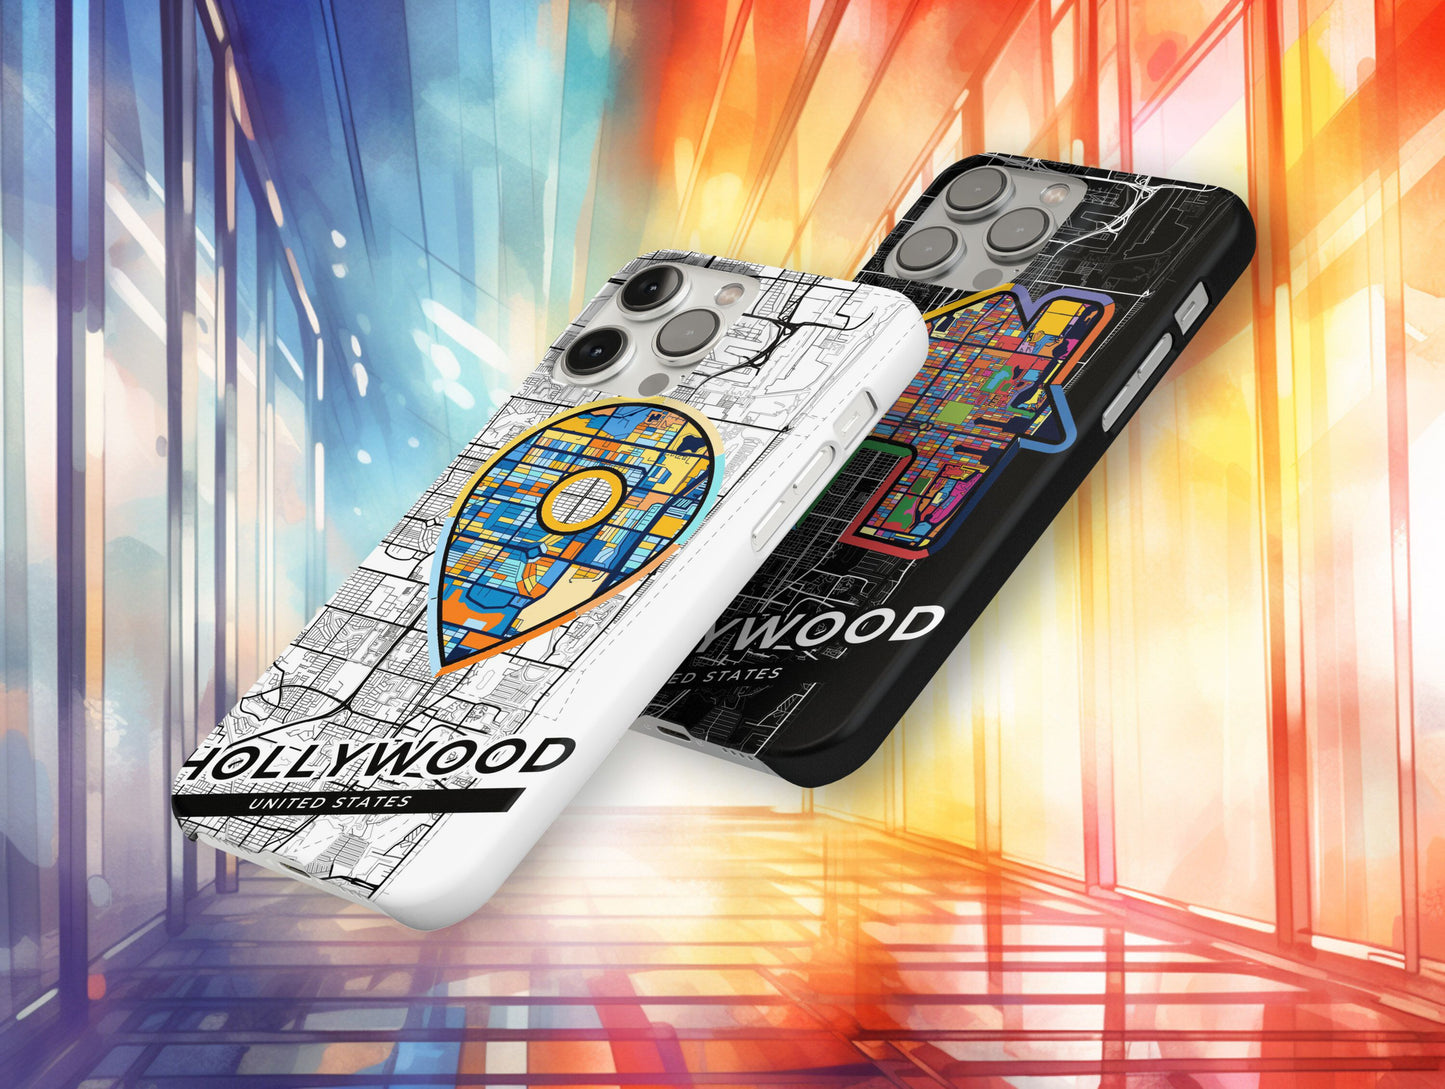 Hollywood Florida slim phone case with colorful icon. Birthday, wedding or housewarming gift. Couple match cases.